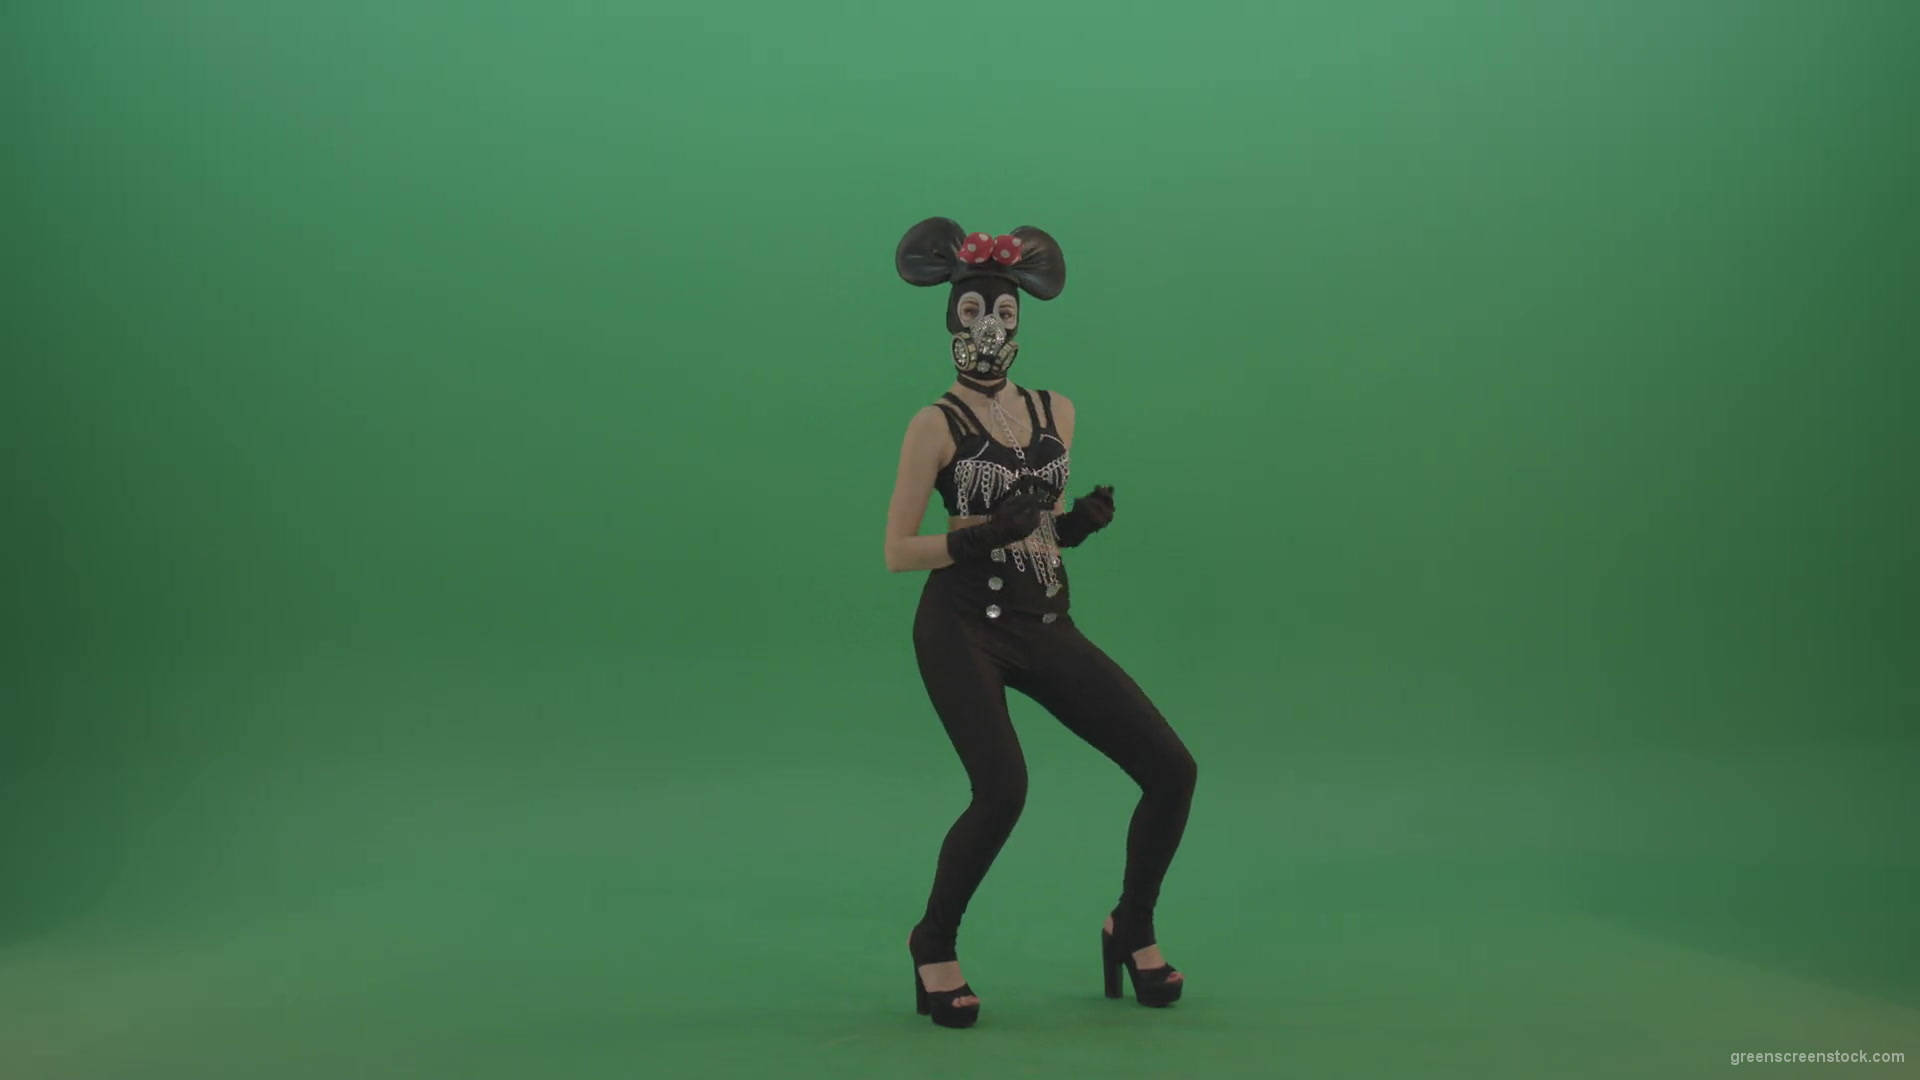 Sexy-dancing-mouse-girl-slowly-dance-in-mask-on-green-screen-1920_002 Green Screen Stock